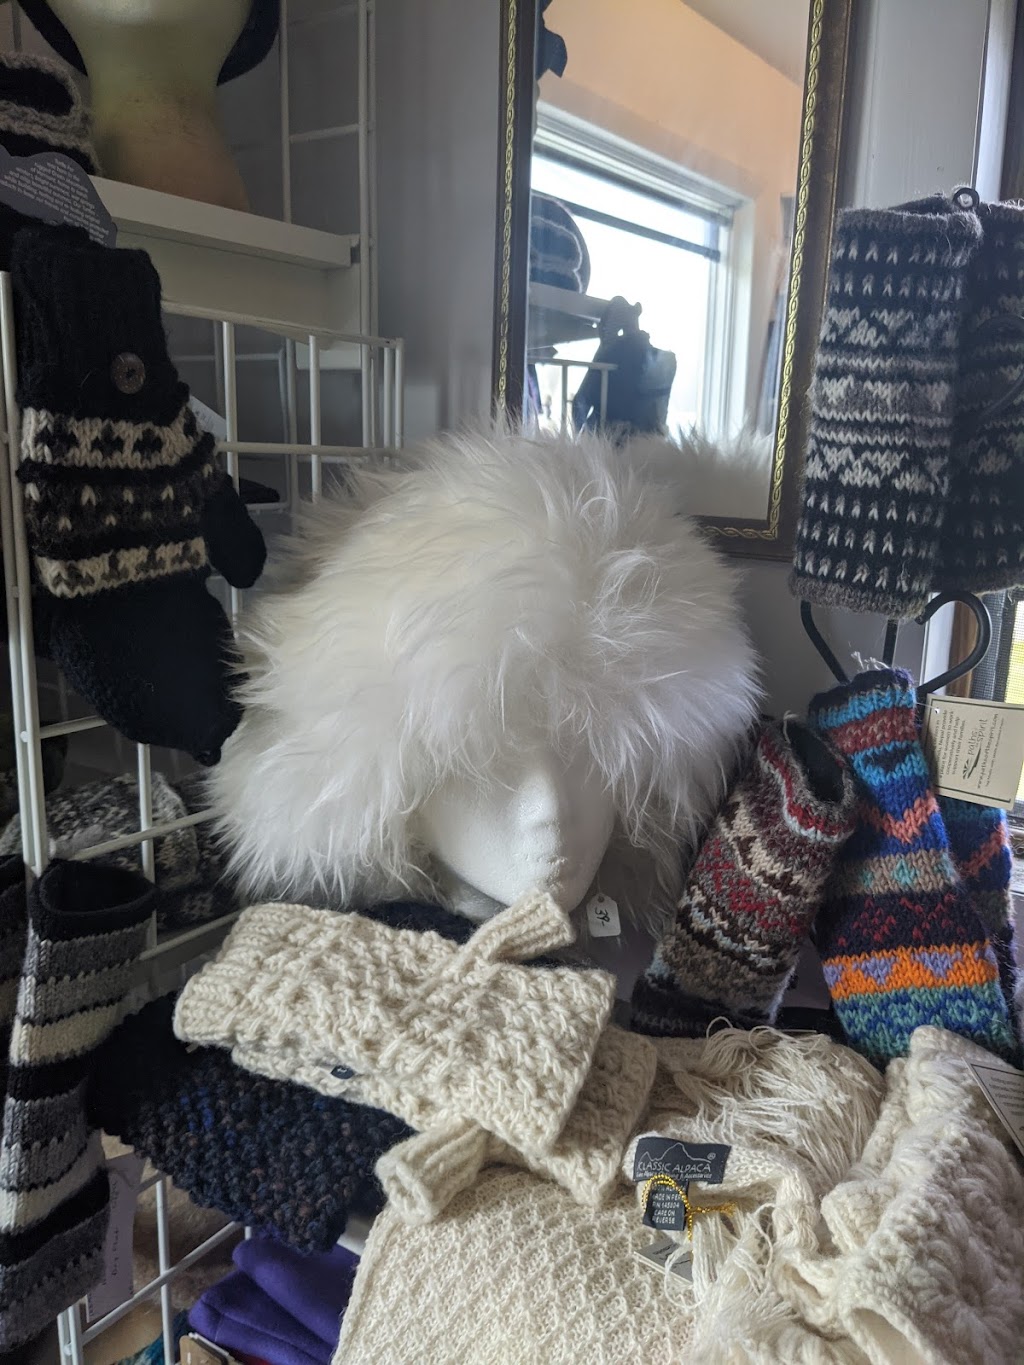 North Country Knits | 551 Hands Mill Rd, Woodbine, NJ 08270 | Phone: (609) 861-0328